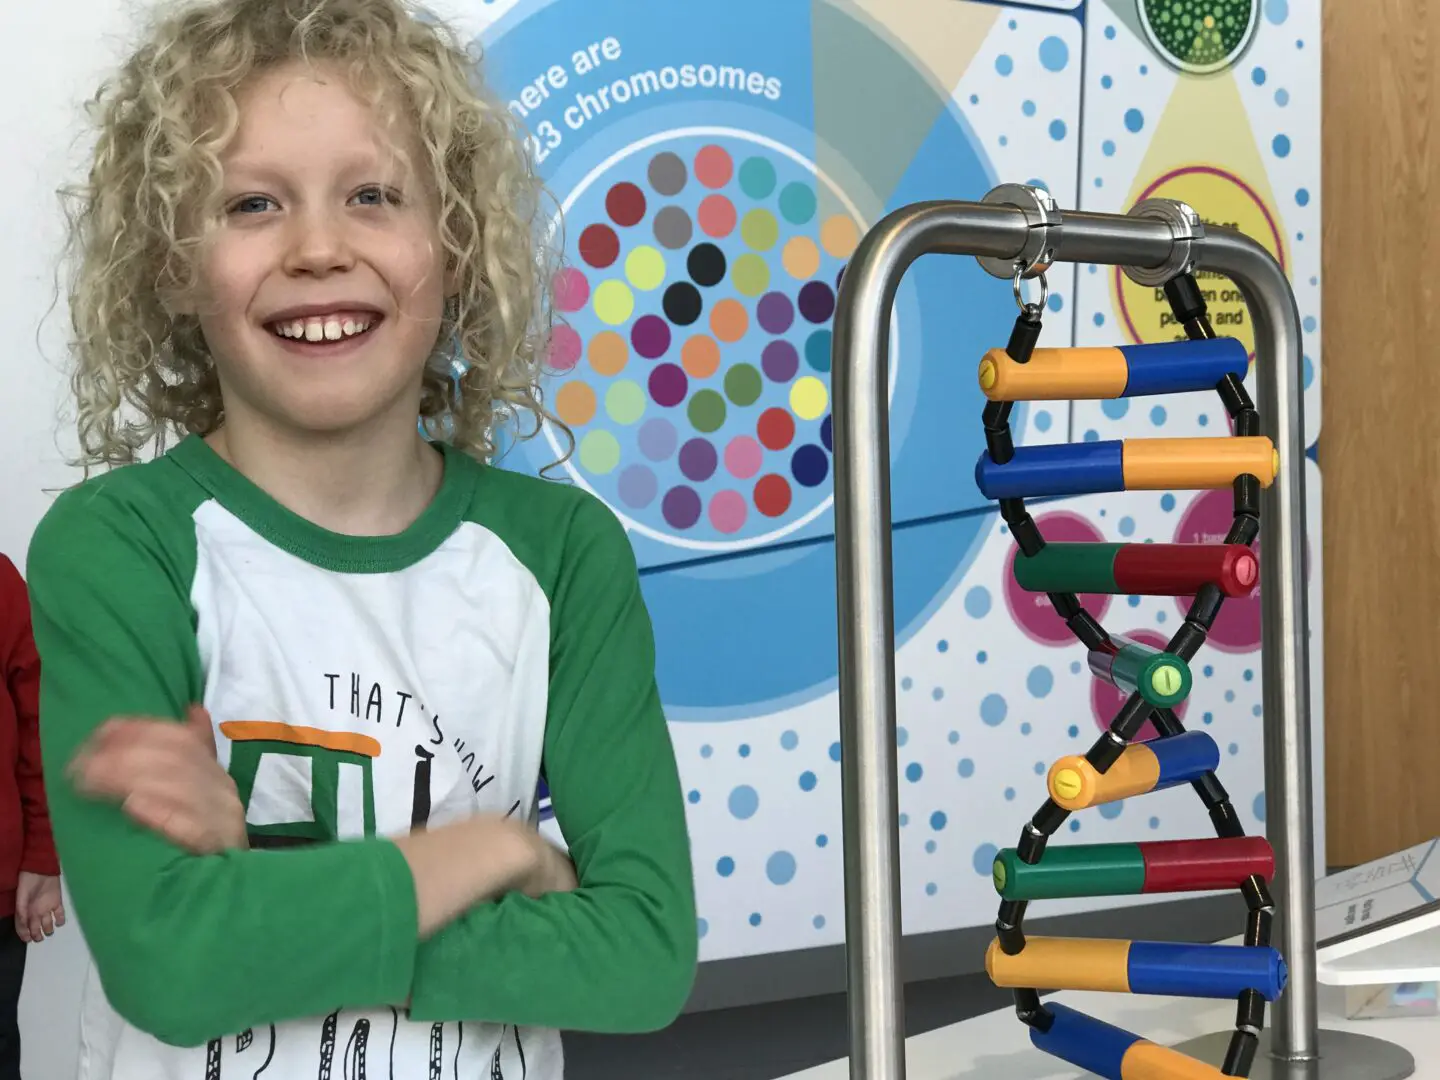 Child with dna interactive magnets at science centre